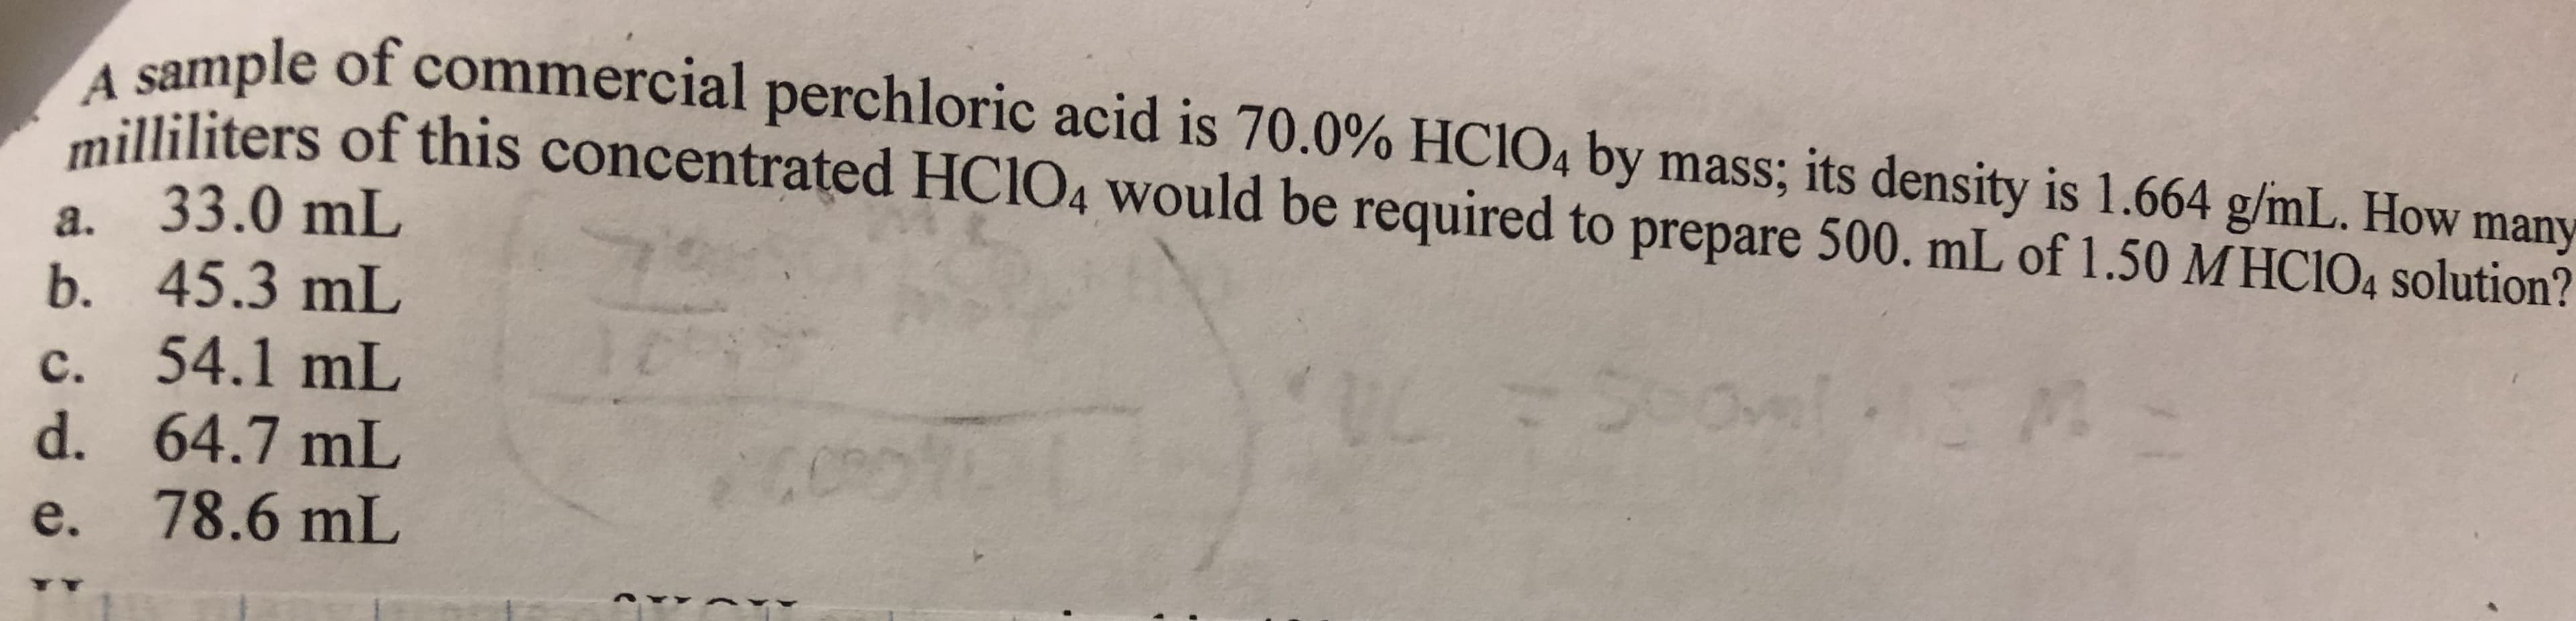 le of commercial perchloric acid is 70.0% HCIO4 by mass, its density is 1.664 g/mL. How many
ated HClo, would be required to prepare 500 ml of 1.50 МНО 104 solution?
illiliters of this concentr
a. 33.0 mL
b. 45.3 mL
c. 54.1 mL
d. 64.7 mL
e. 78.6 mL
